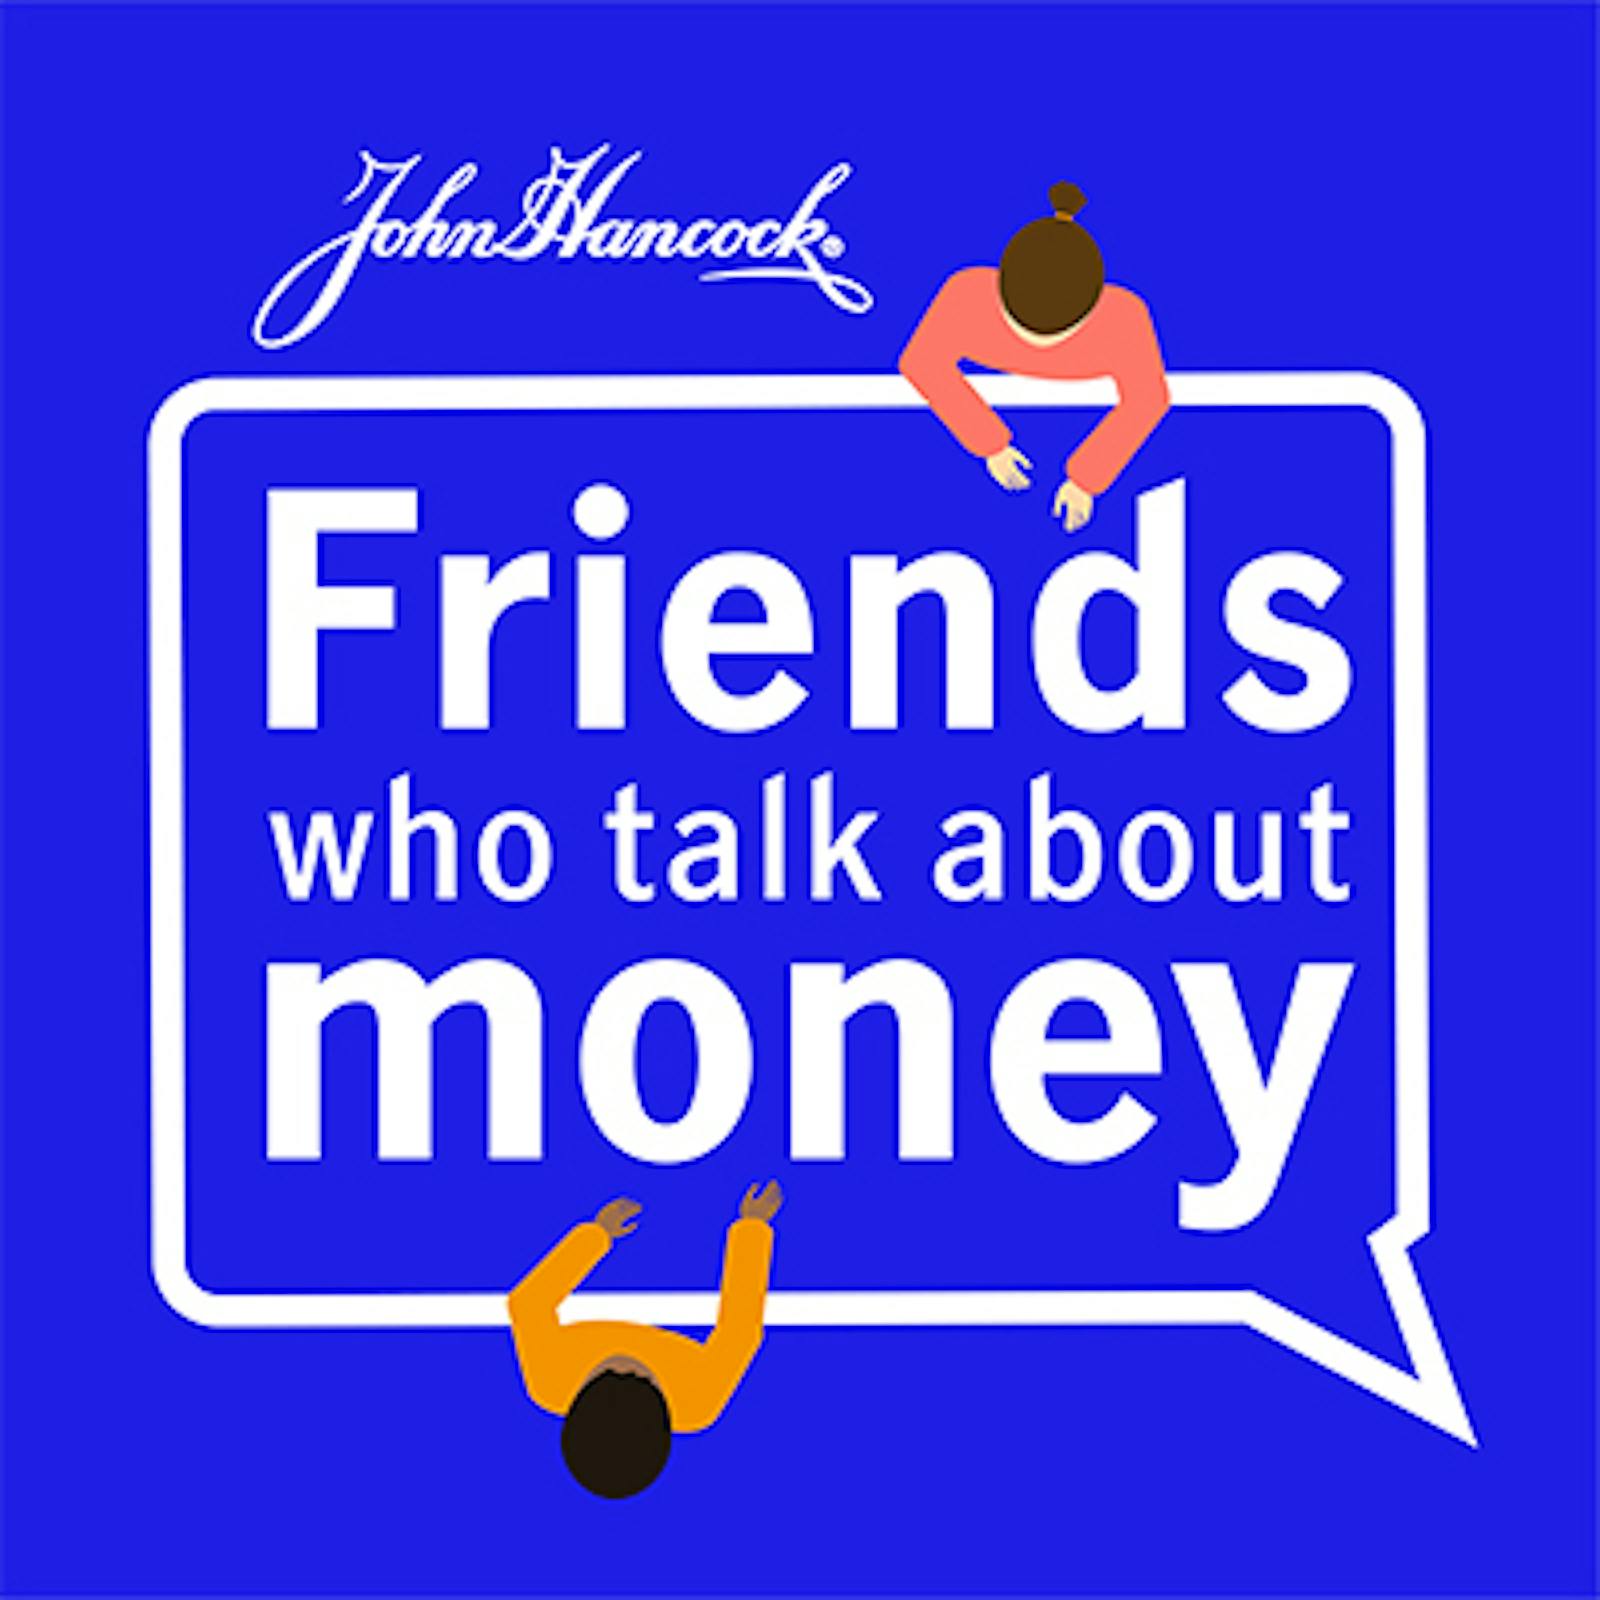 LISTEN TO FRIENDS WHO TALK ABOUT MONEY